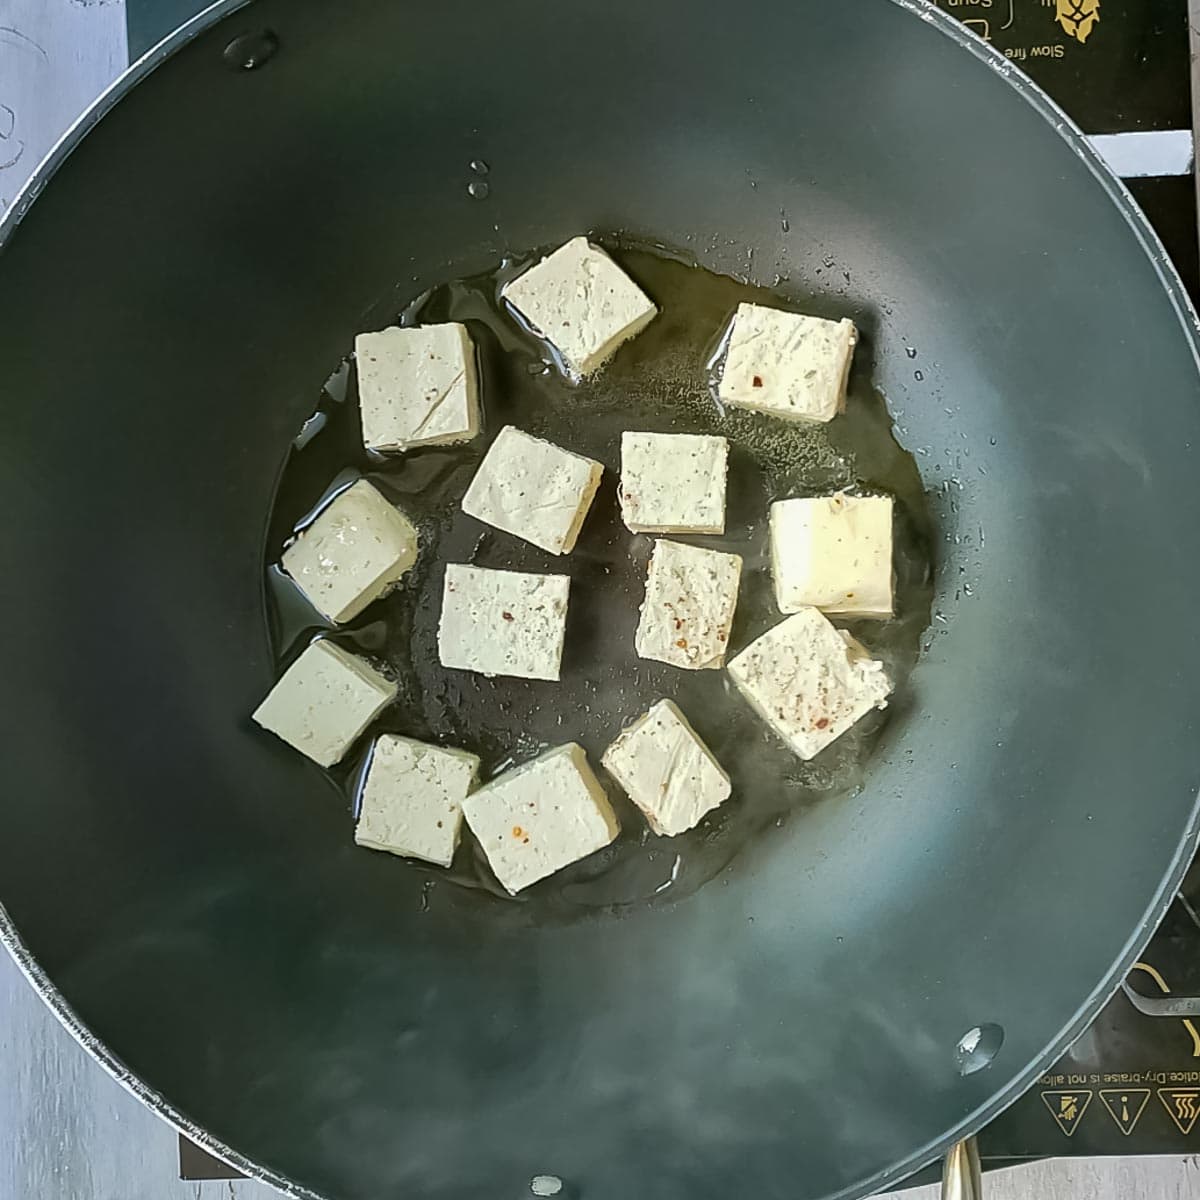 Tofu placed in hot oil in a non stick pan.